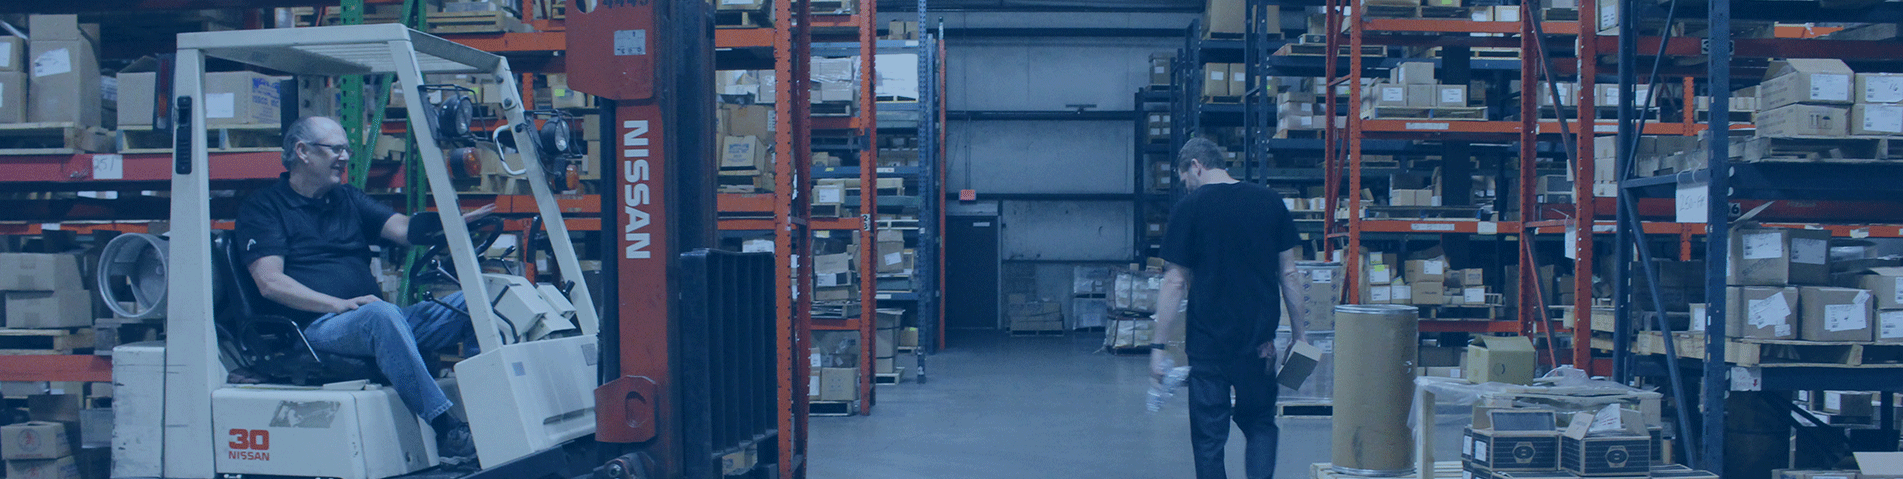 ISSCO workers working in their warehouse